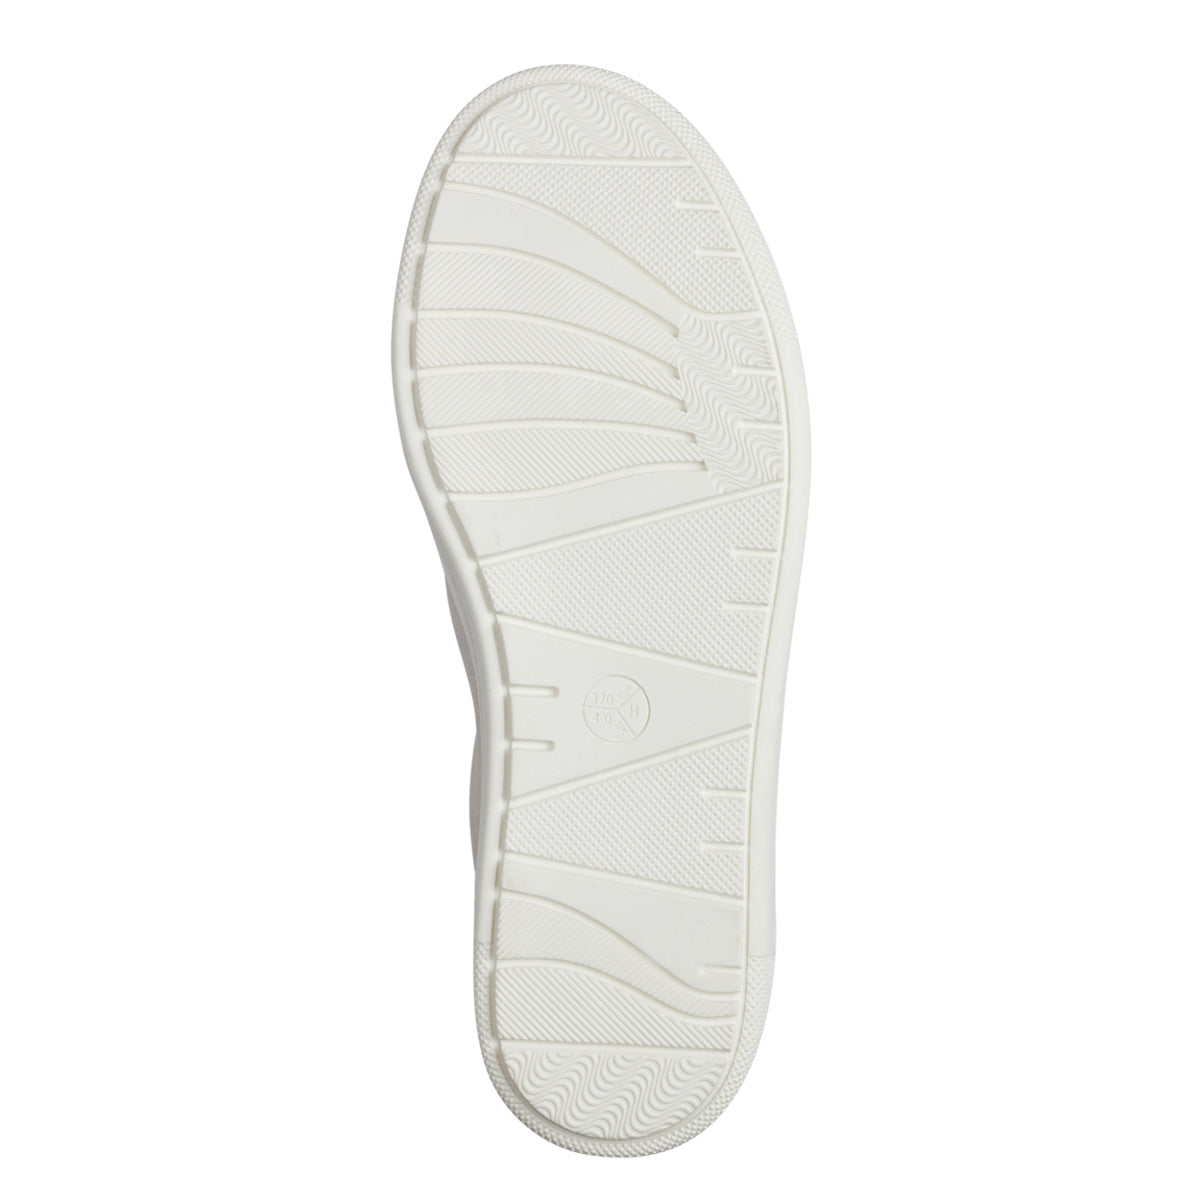 Sole view depicting the eco-friendly off white outsole.